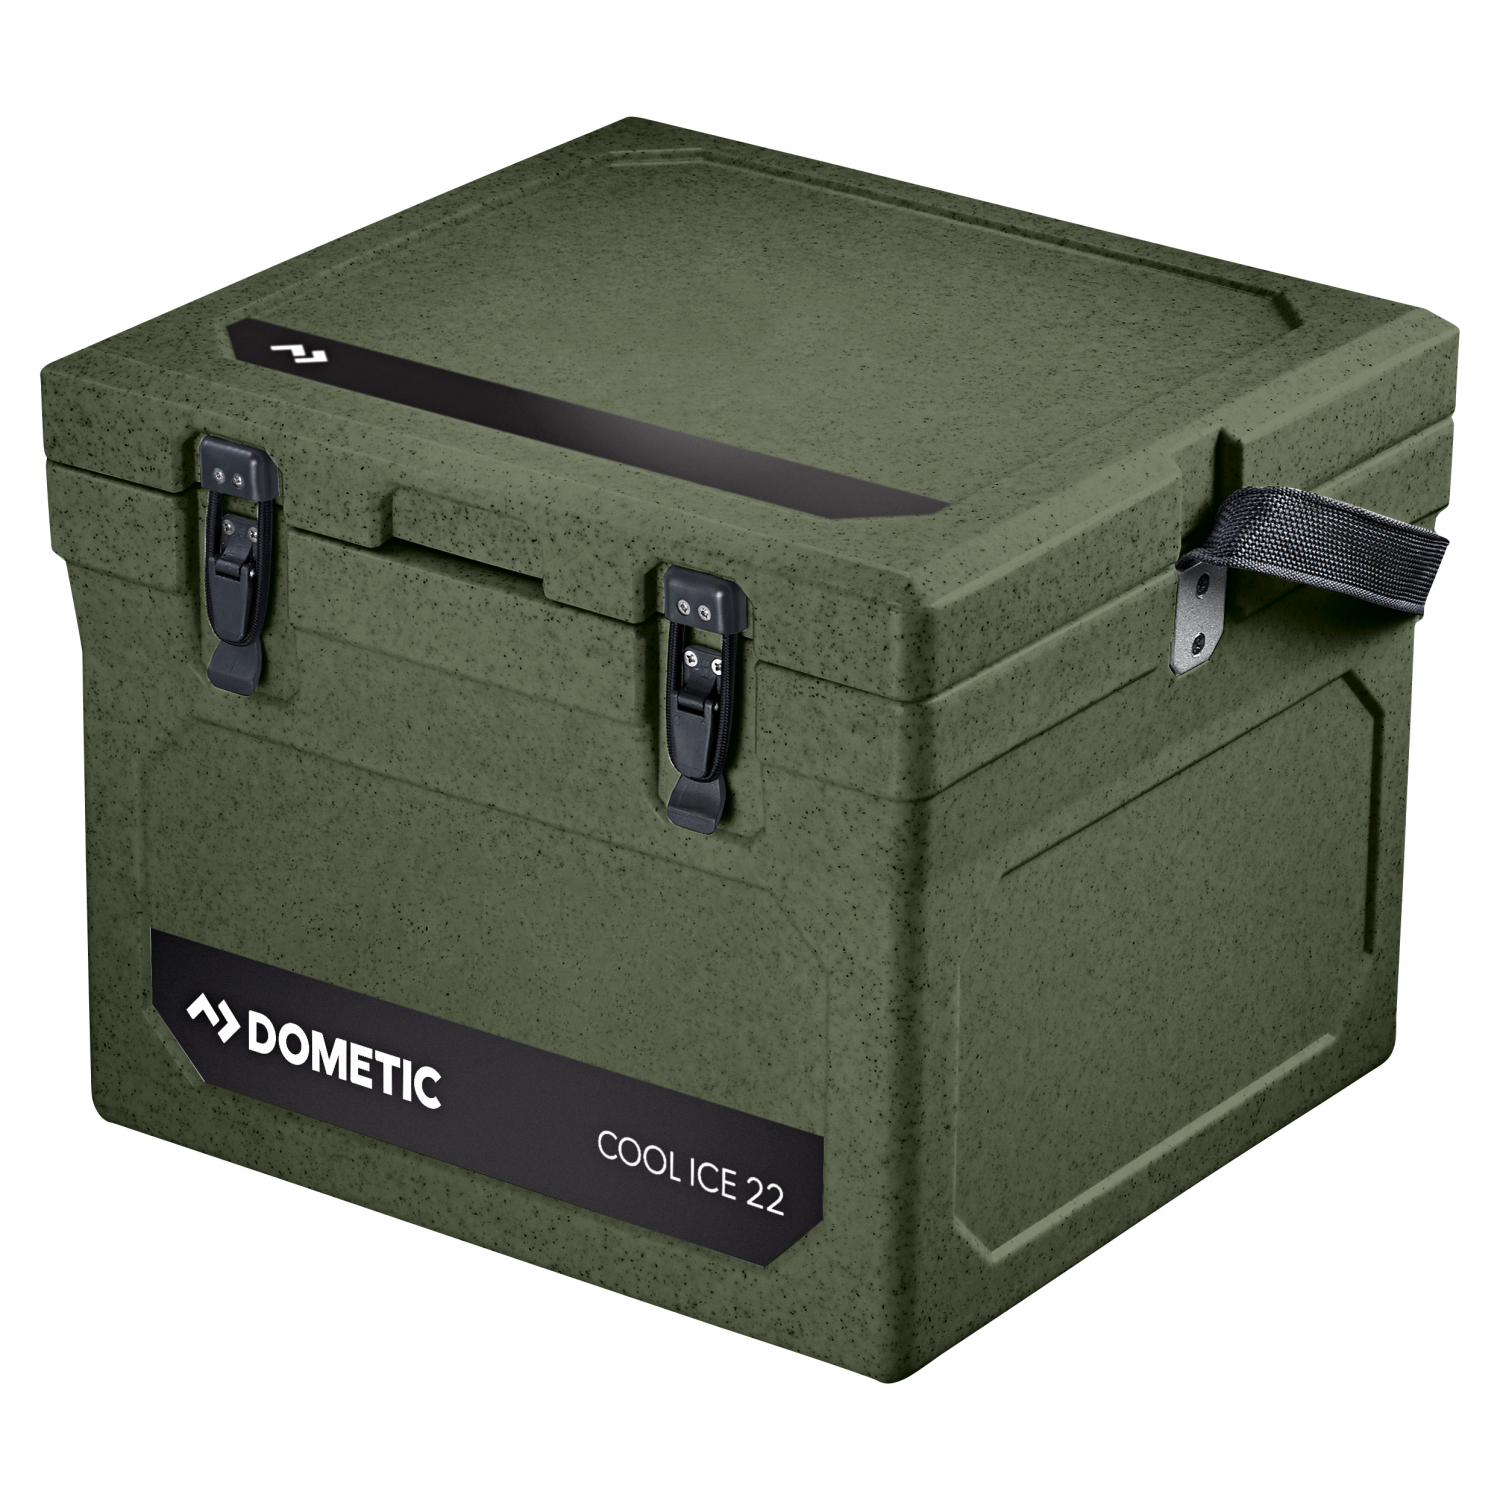 Dometic Cooler Box Cool Ice WCI 22 at low prices